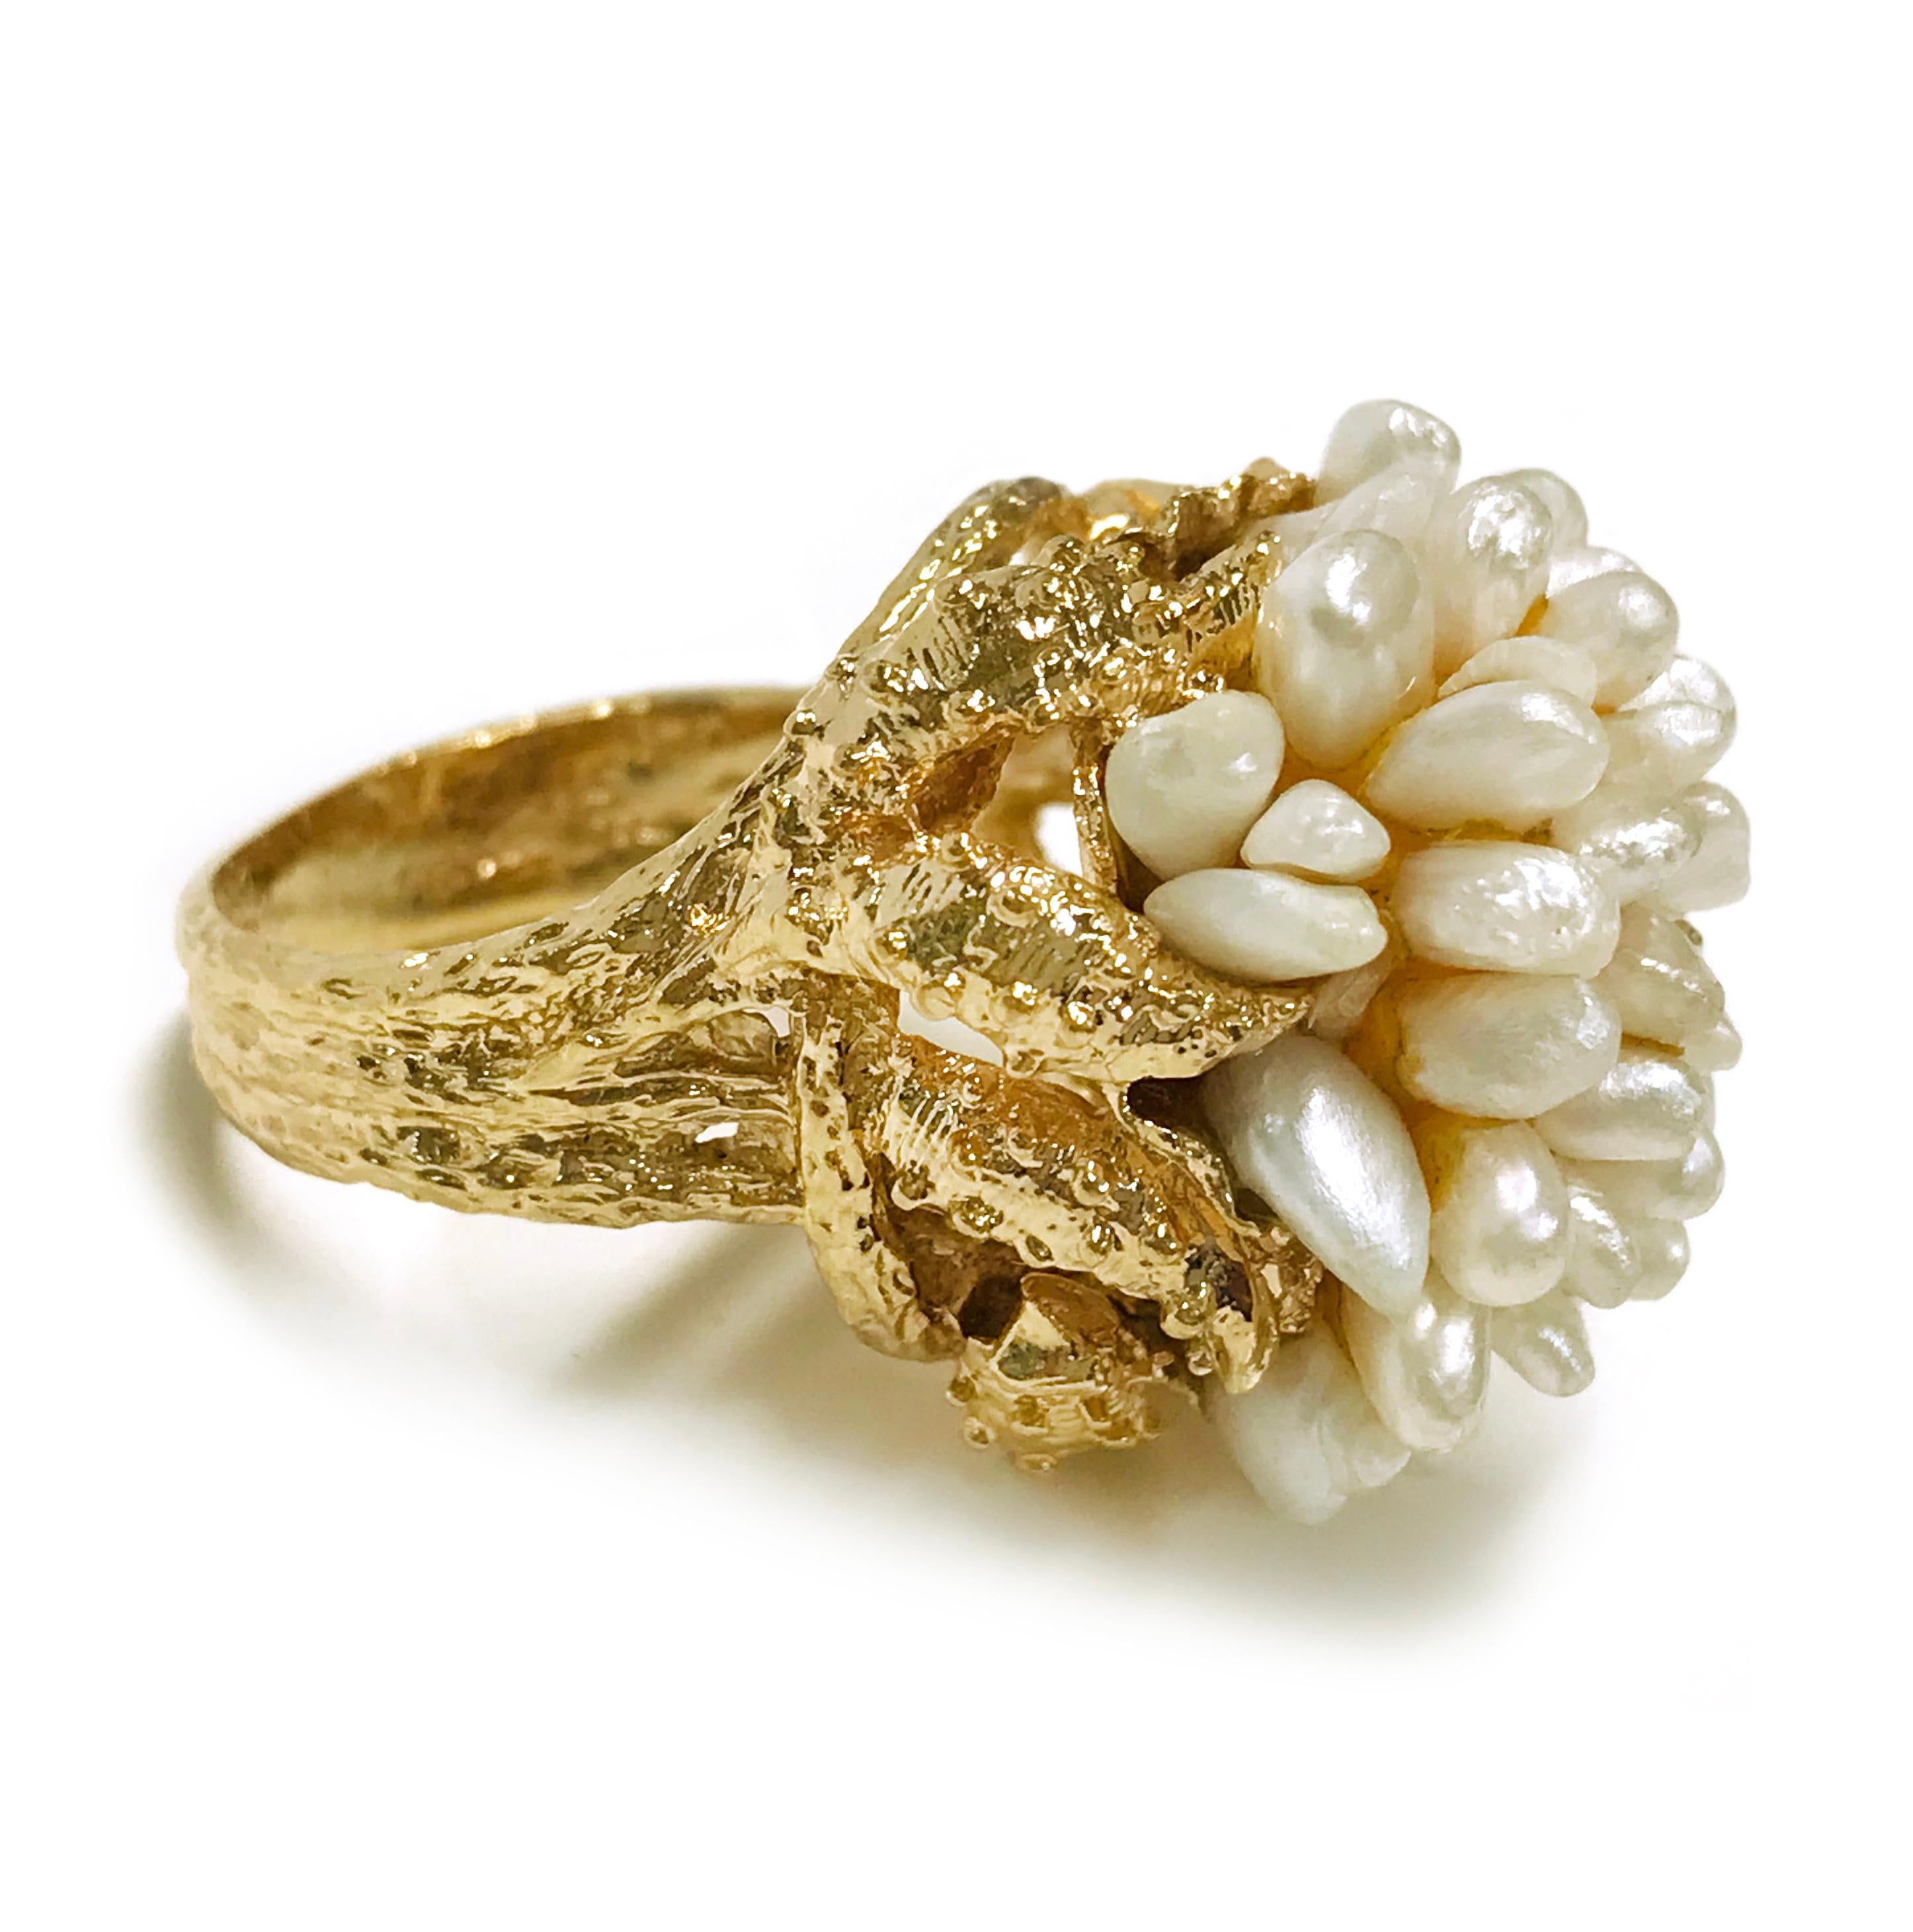 14 Karat Freshwater Pearl Cluster Ring. This three-band split ring features forty freshwater pearls. The pearls are creamy-white and have good luster. The ring size is 7 1/4. The total gold weight of the ring is 18.05 grams.